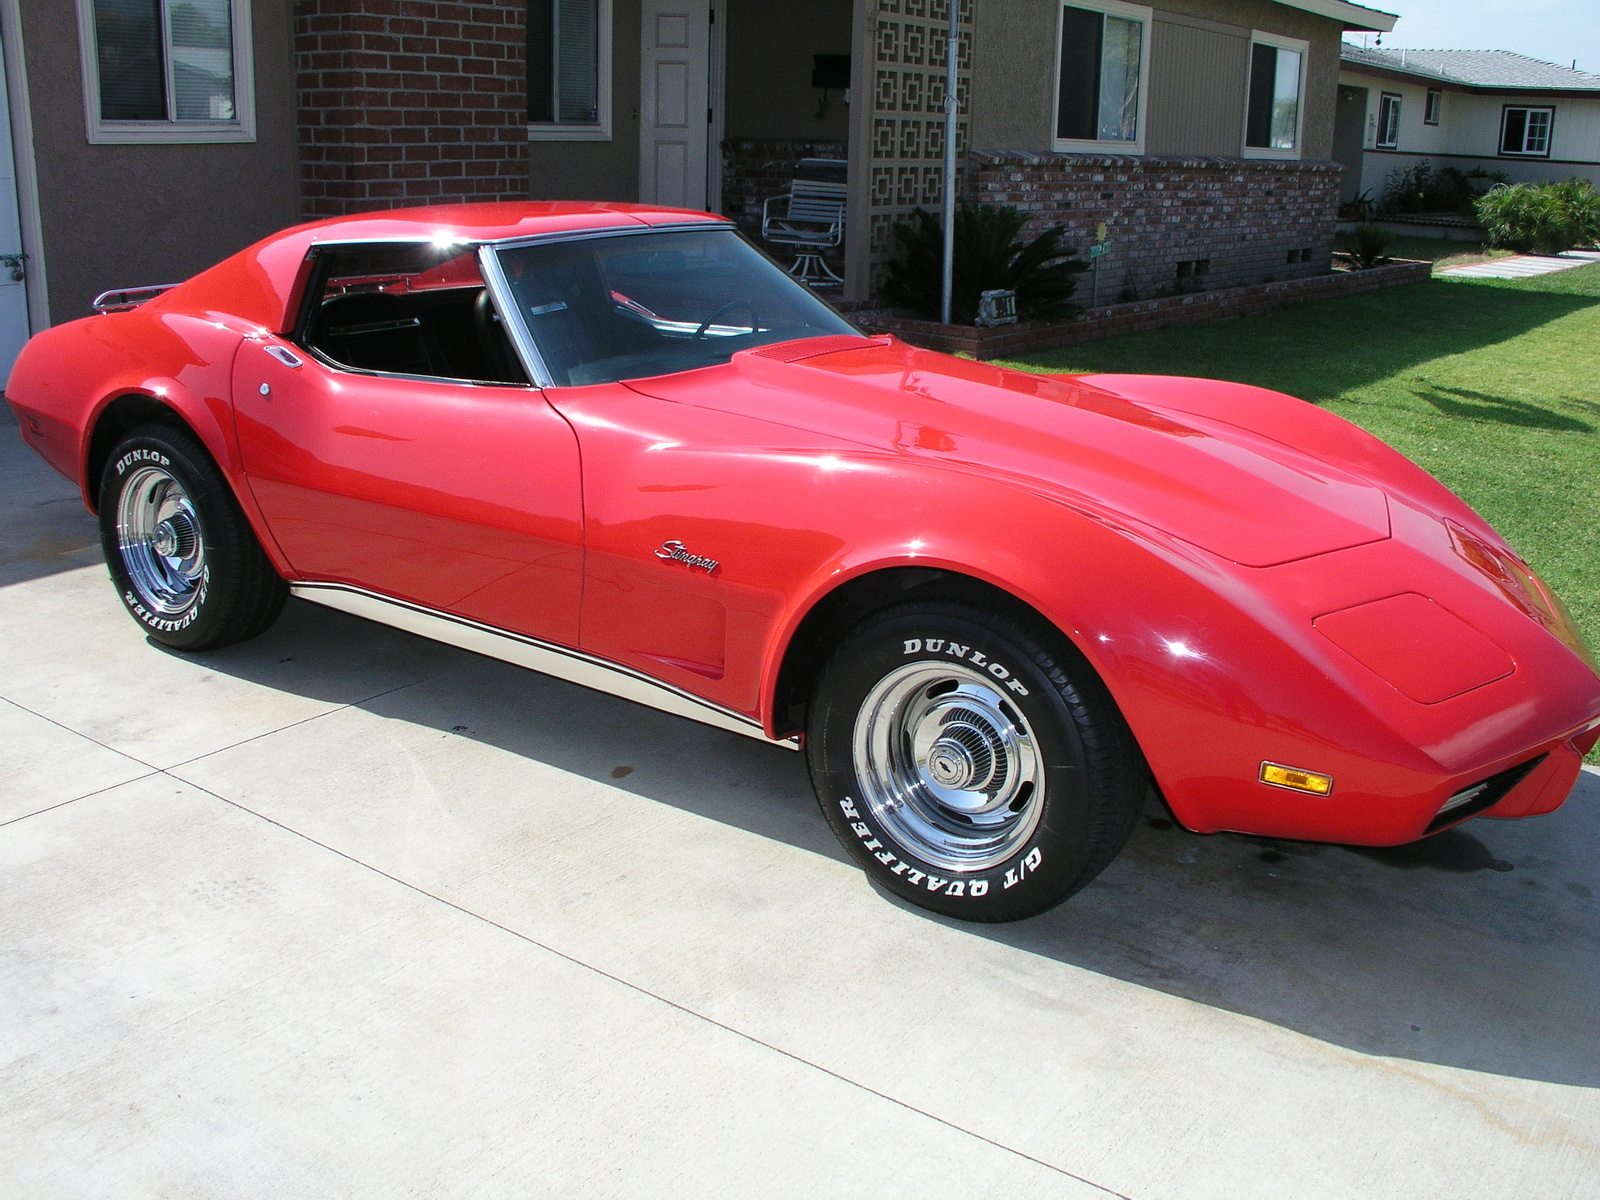 1975 Chevy Corvette: The Timeless American Sports Car